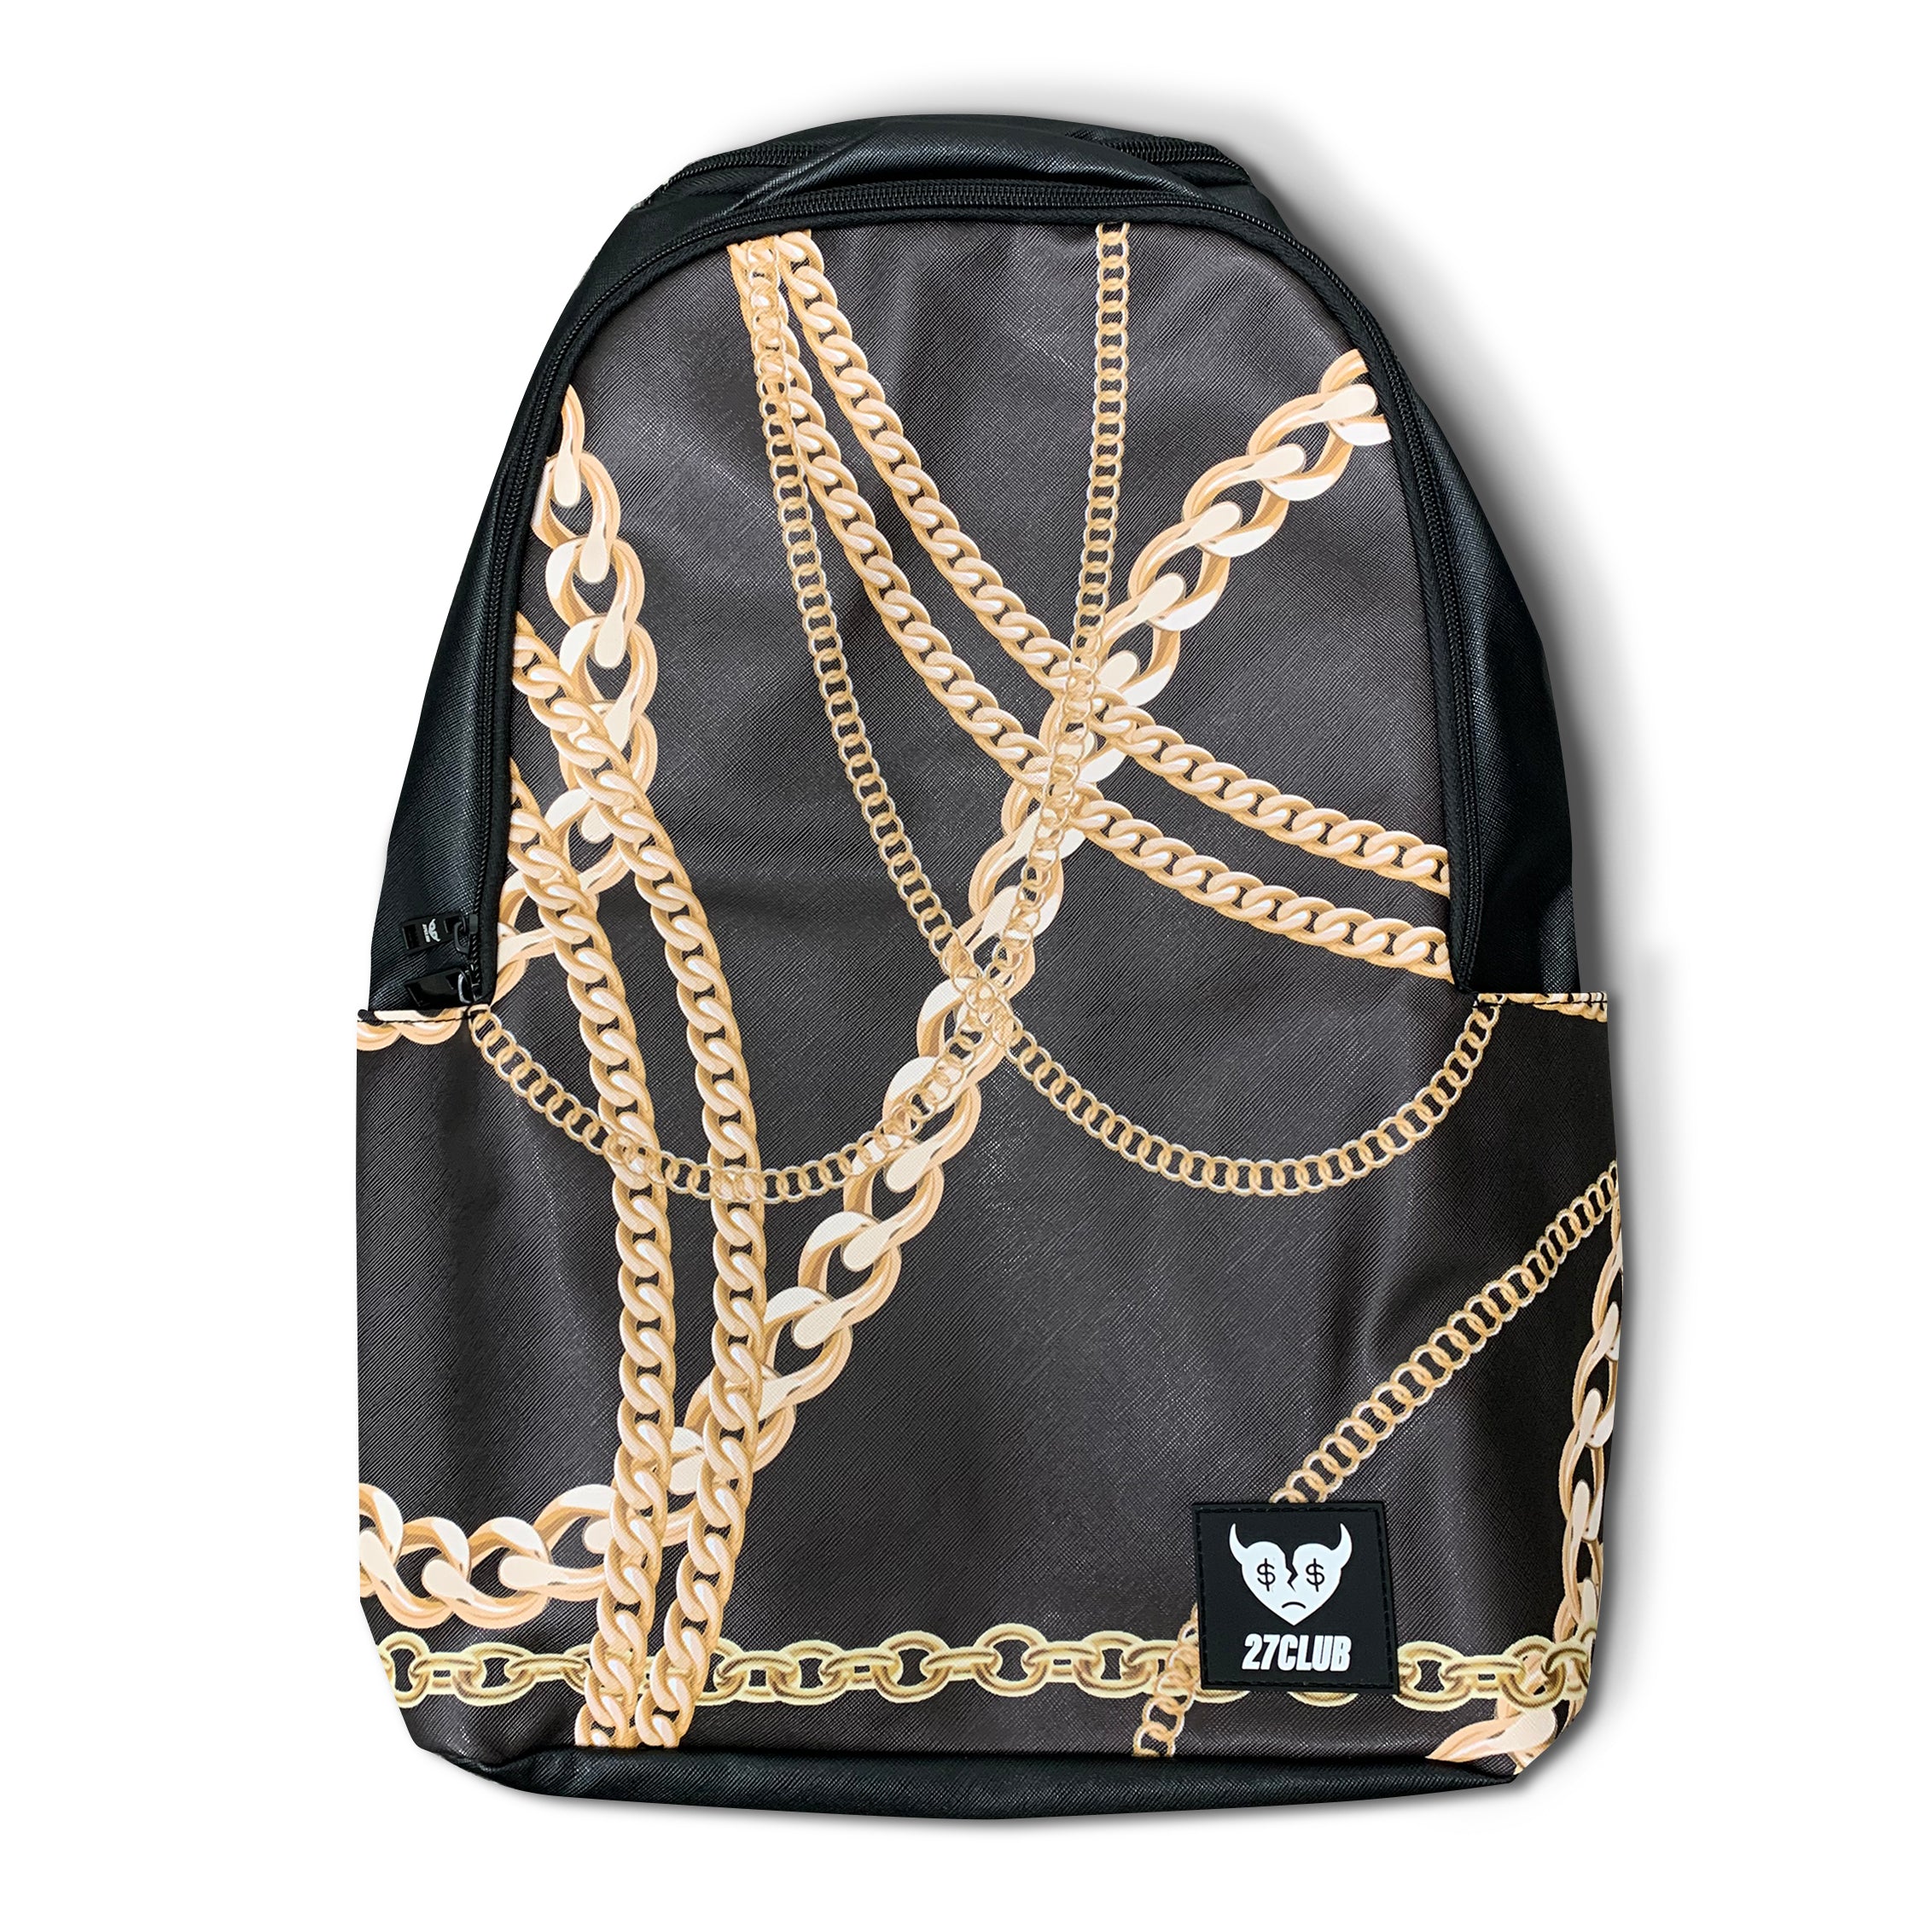 Chains on Chains Backpack